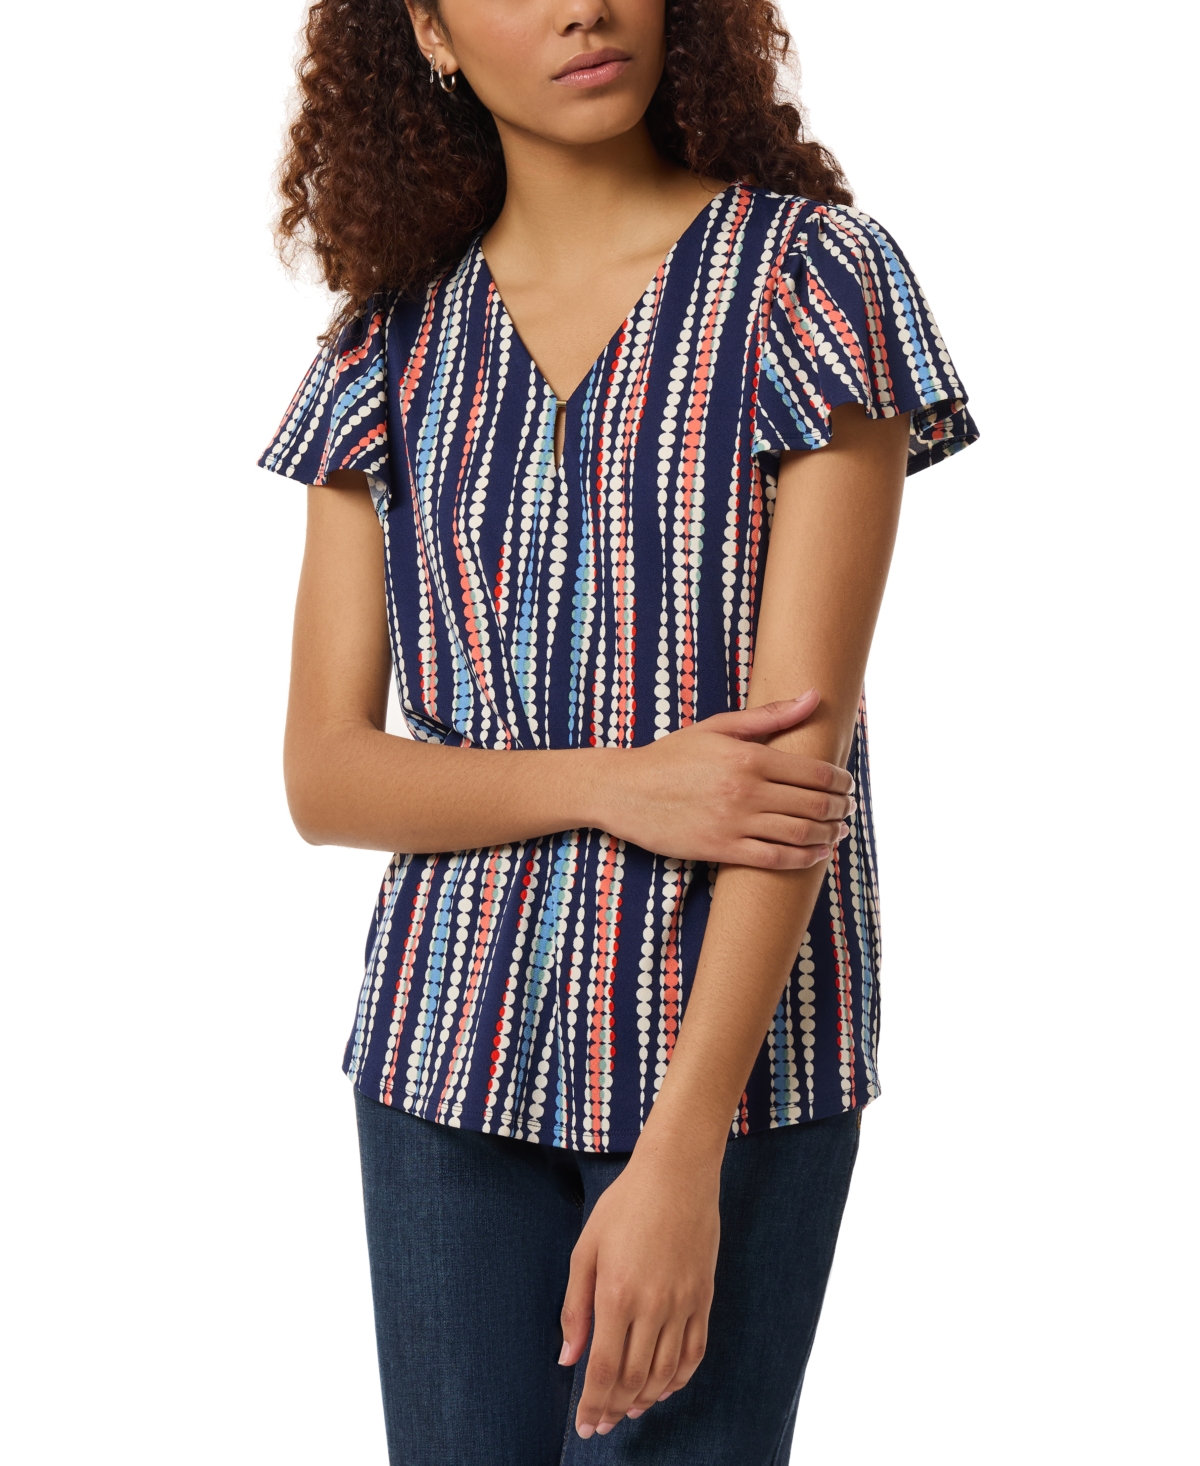 Women's Printed V-Neck Moss Crepe Top - Pacific Navy